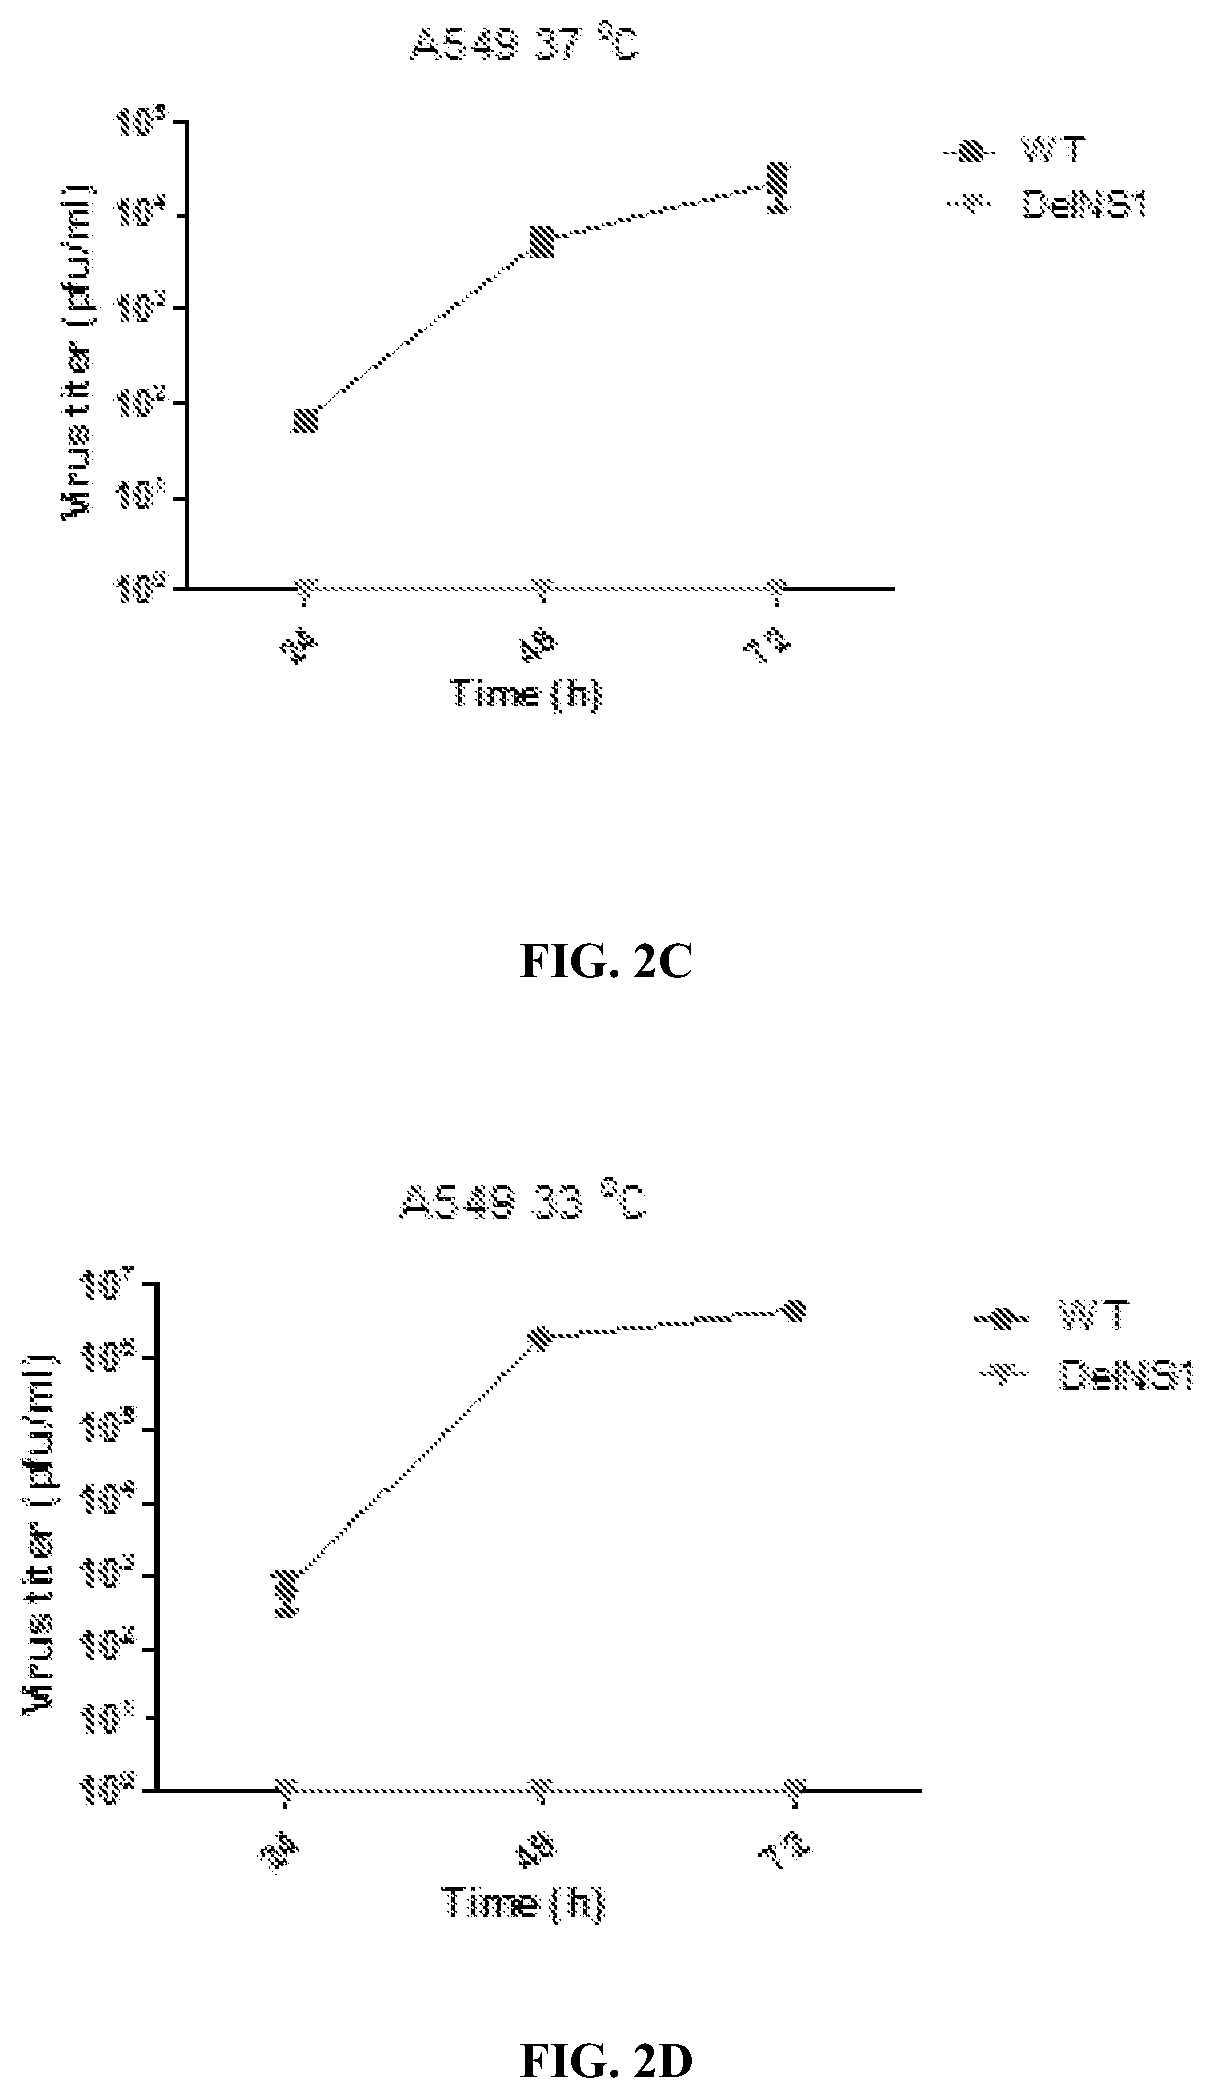 Live attenuated influenza b virus compositions methods of making and using thereof